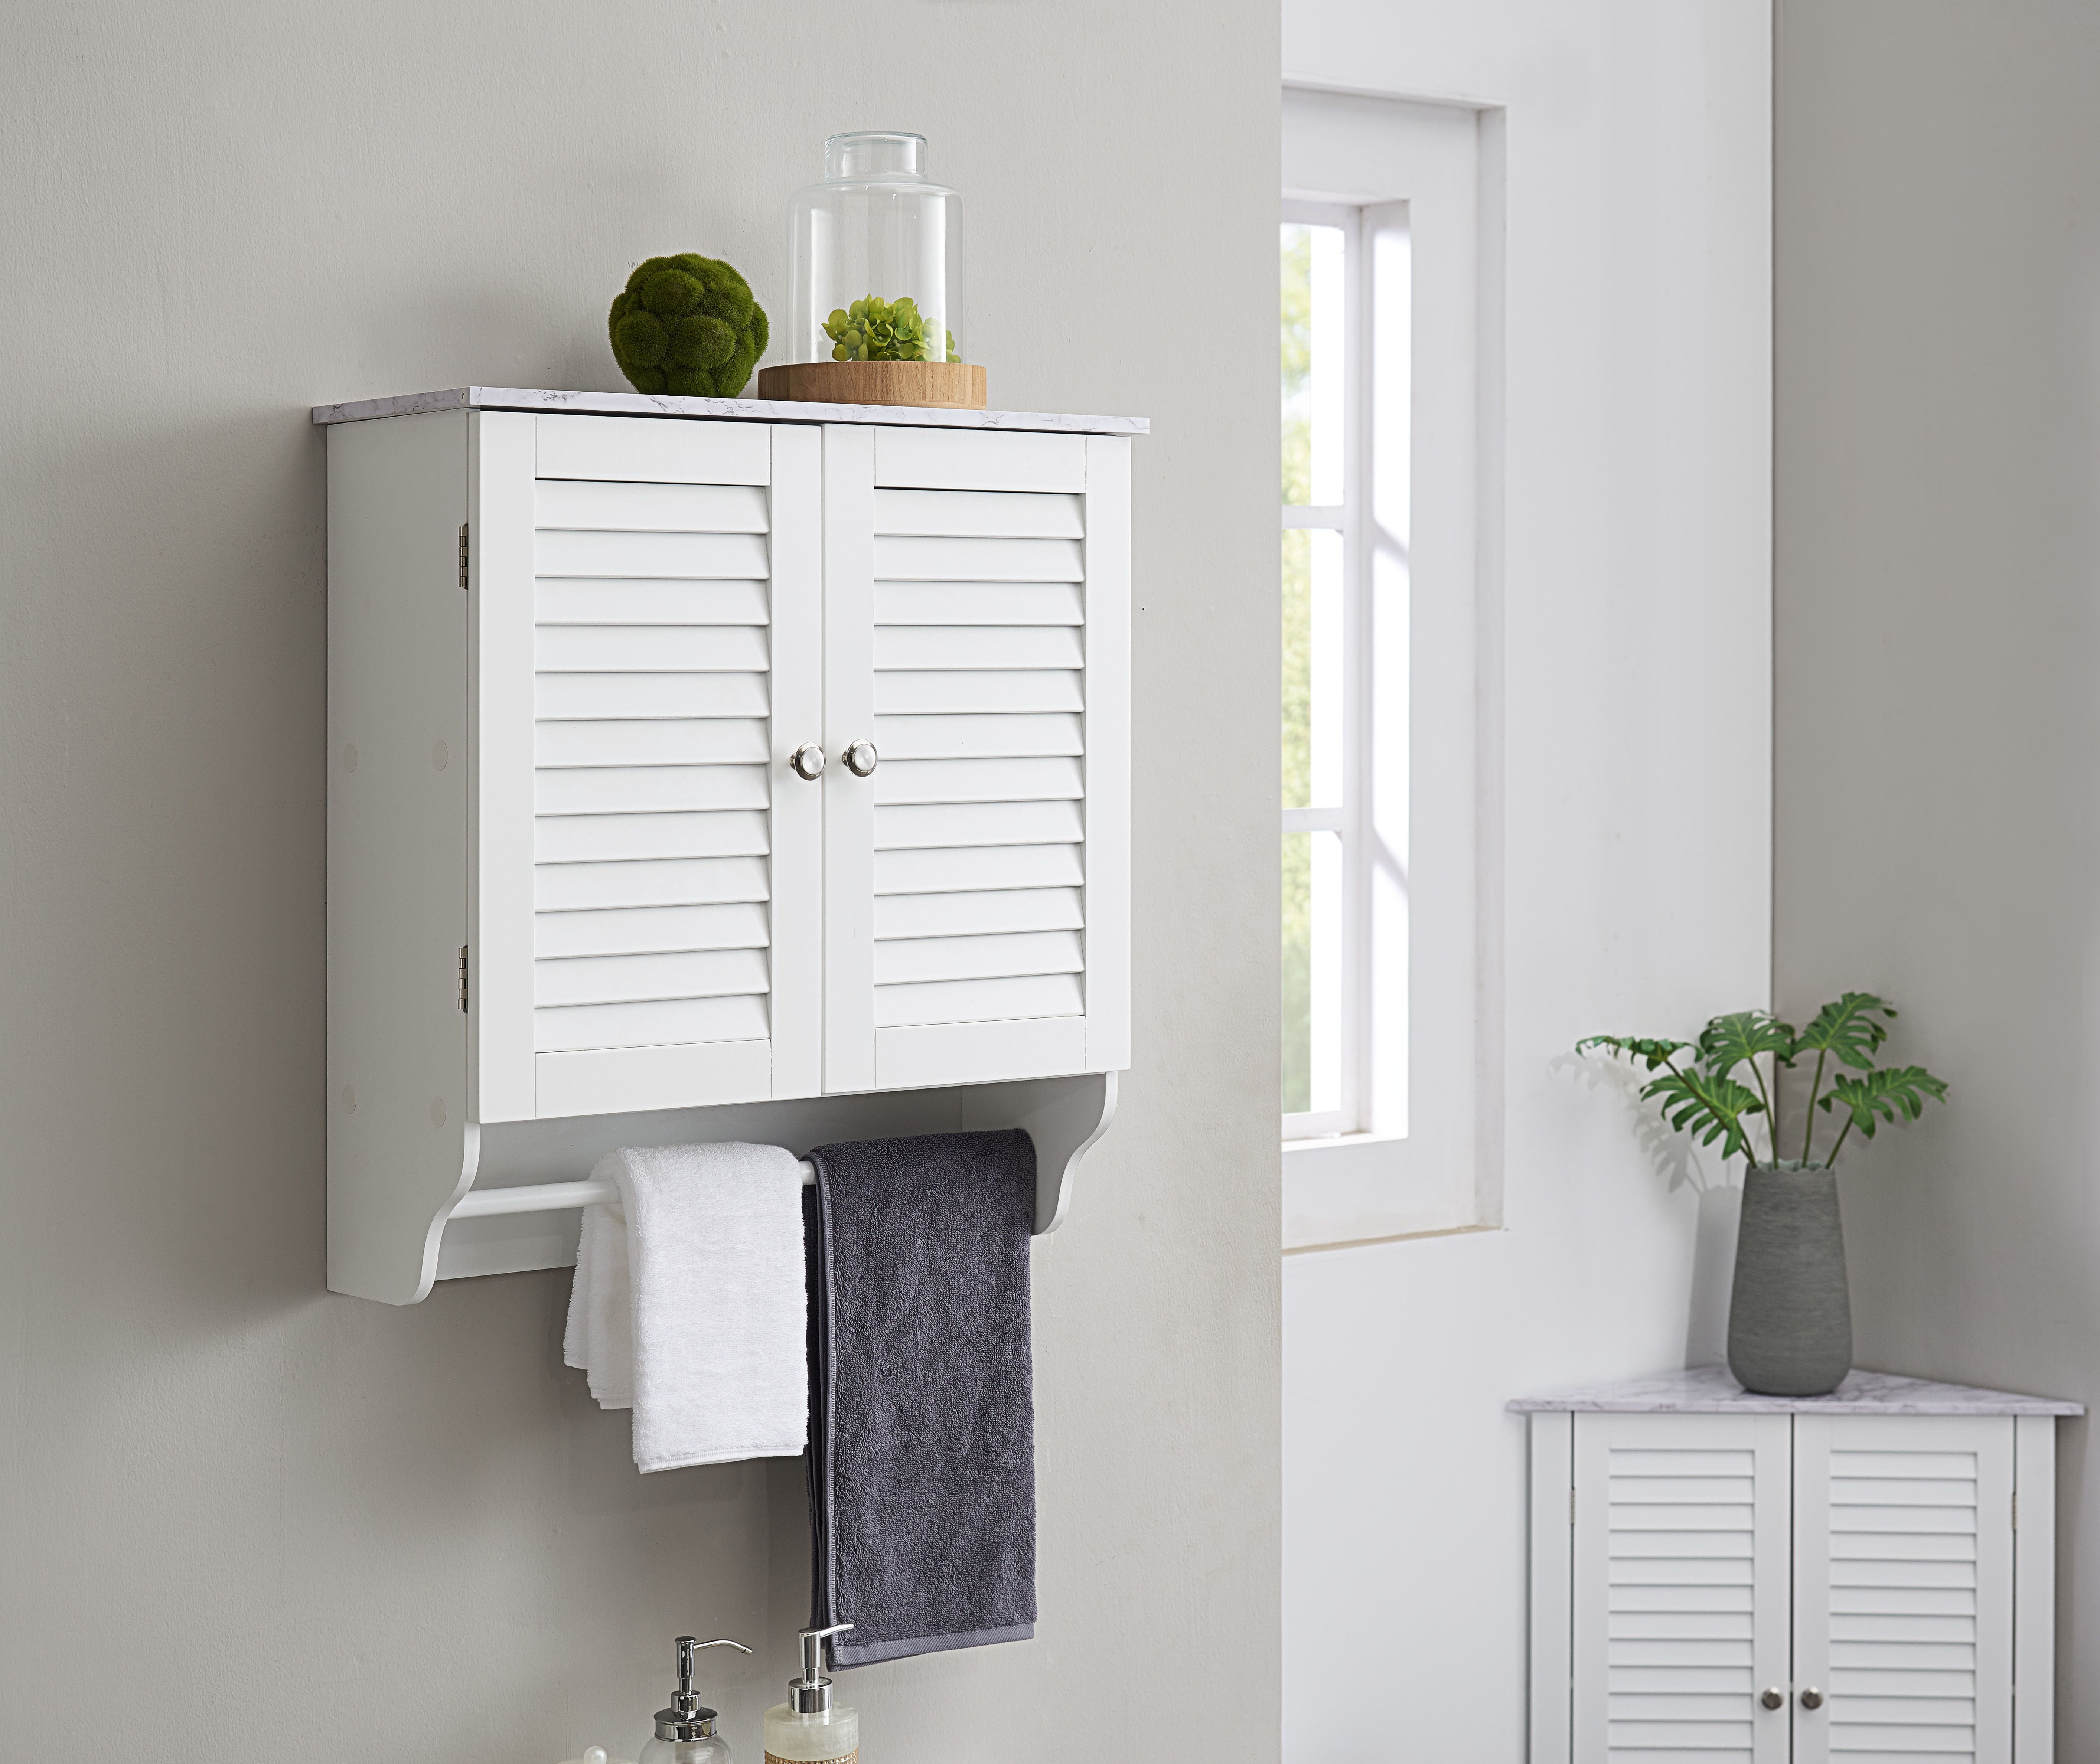 Trevita Wall Mounted Bathroom Storage Cabinet With Towel Rack White Marble Wood Com - White Bathroom Cabinet With Towel Bar